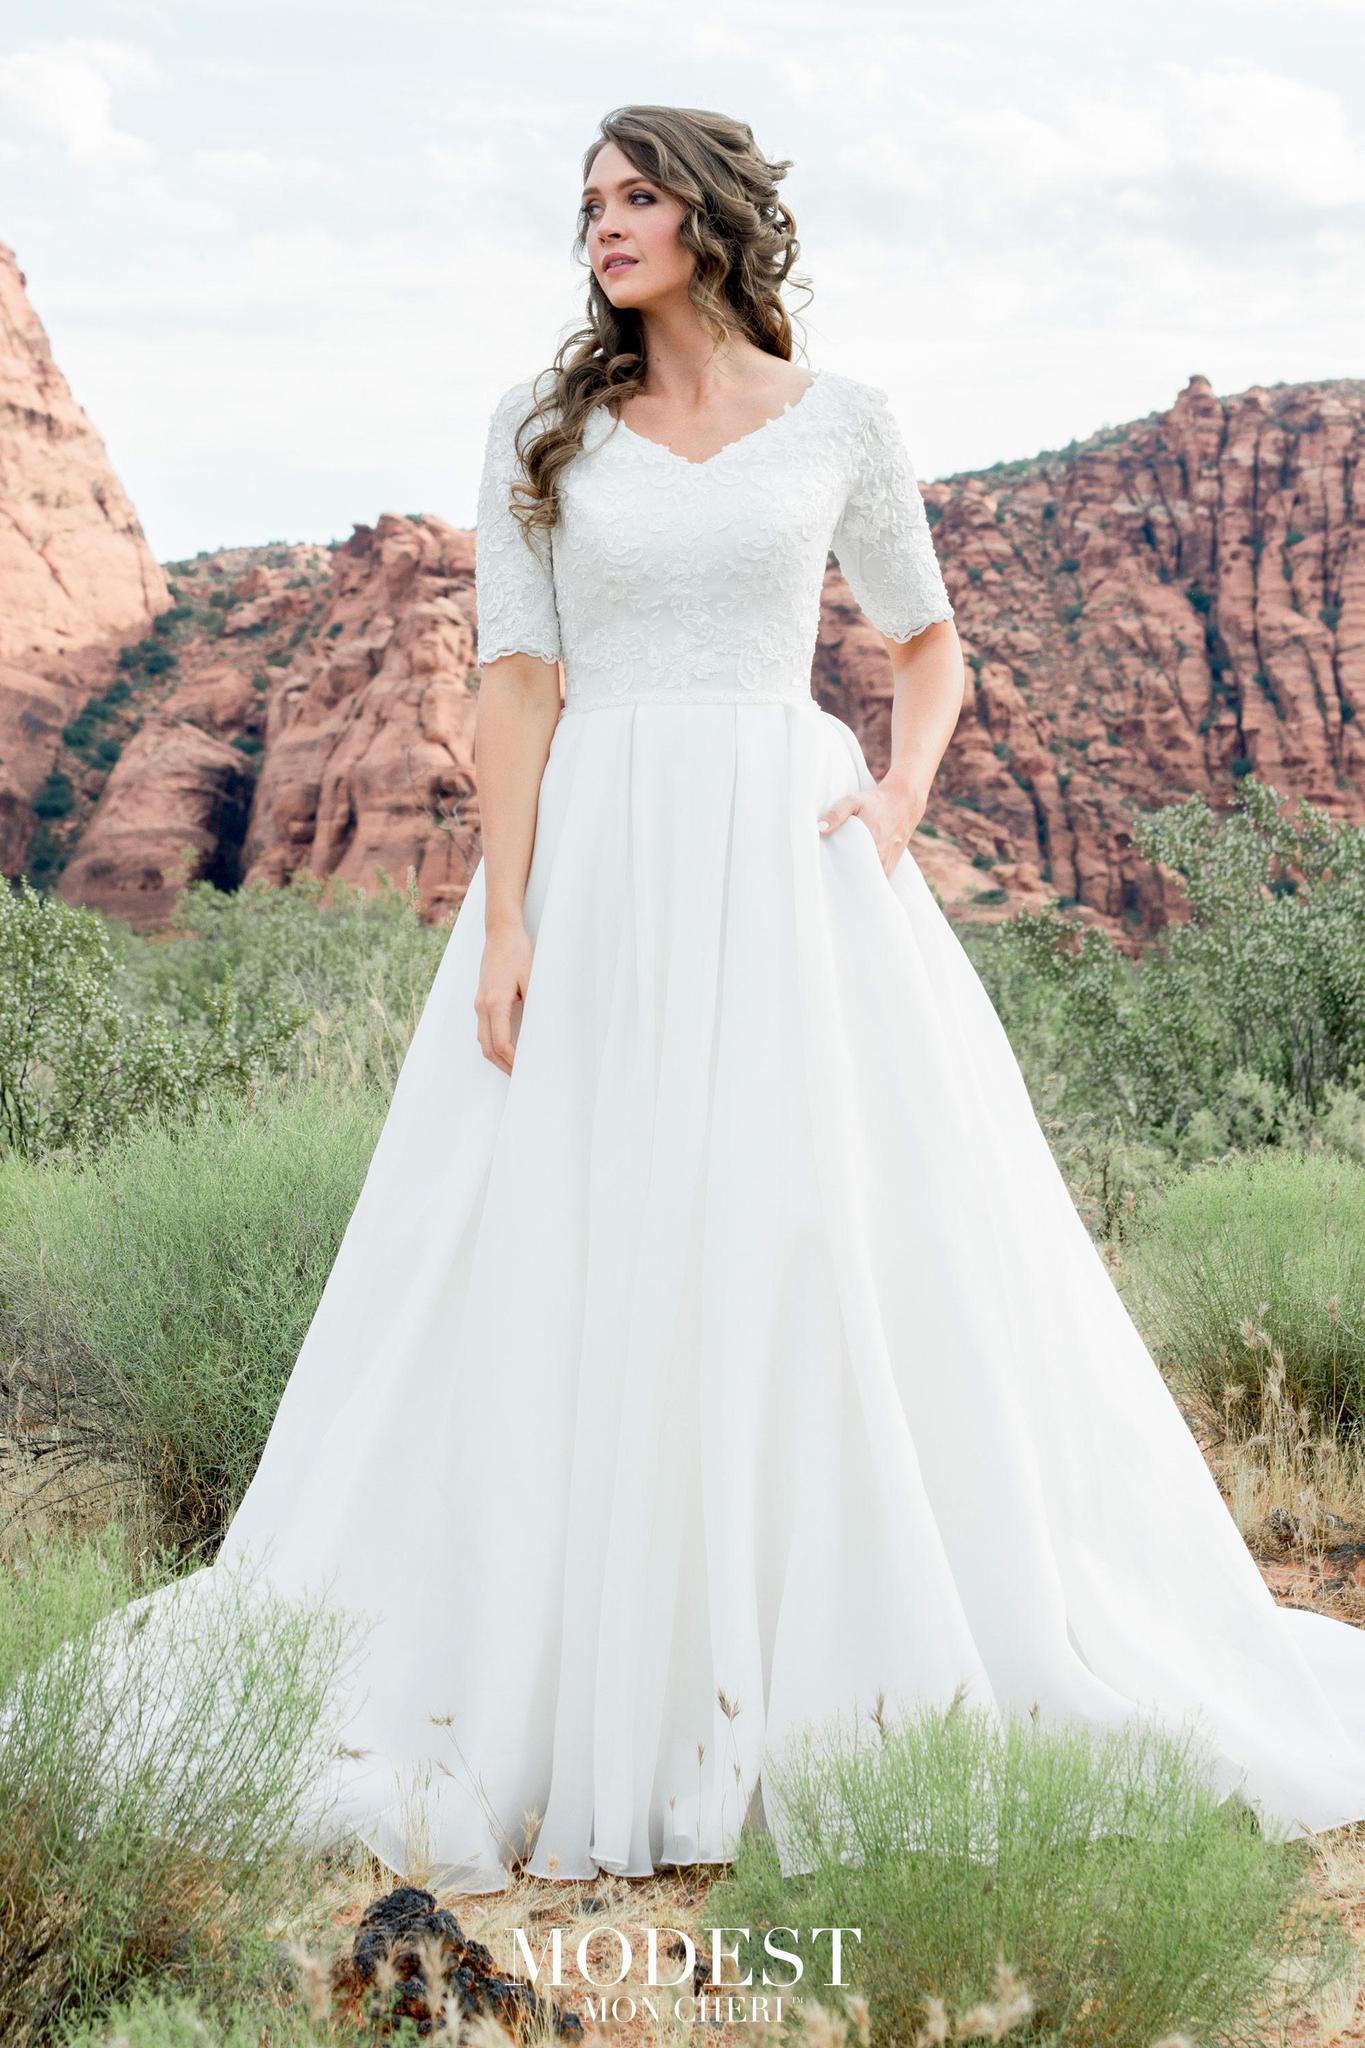 Plus Size Modest Wedding Dresses Best 10 - Find the Perfect Venue for ...